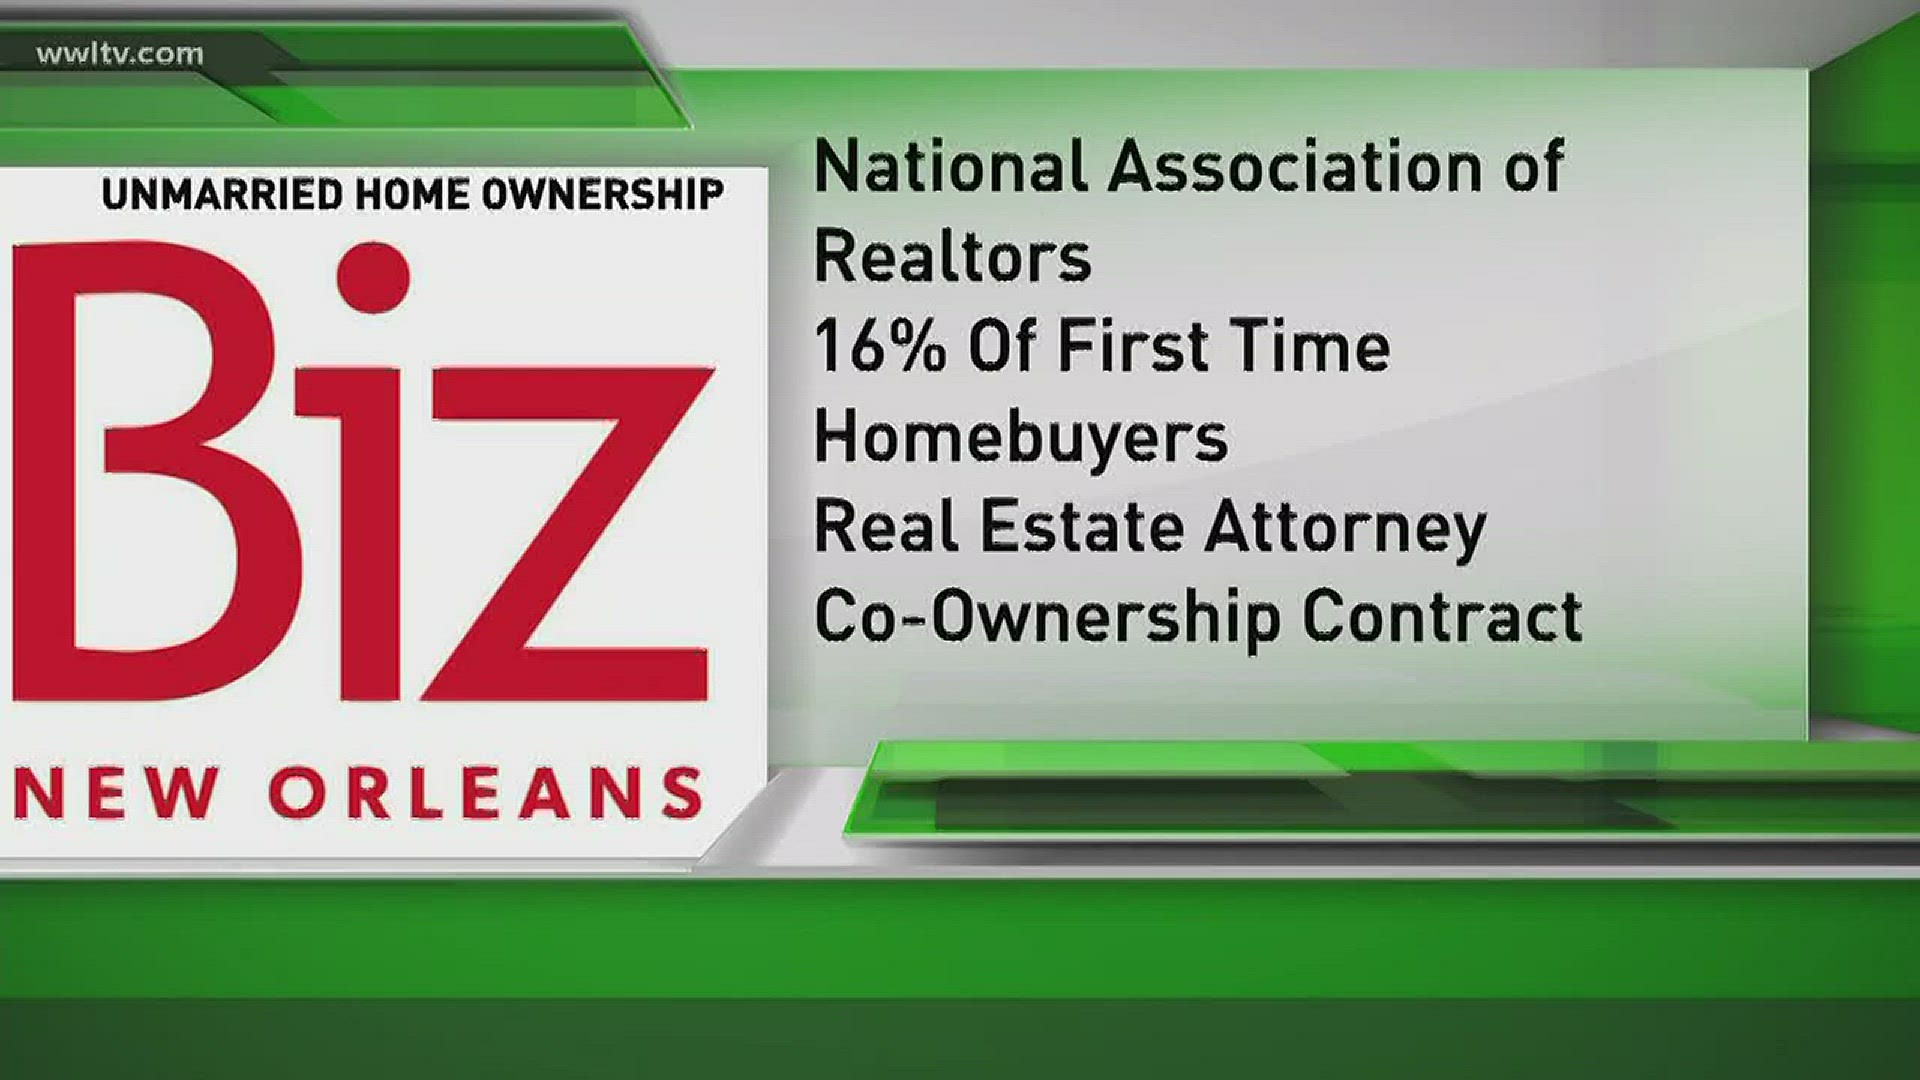 So you?re in love and you want to buy a house with your partner, but you?re not legally married. BizNewOrleans.com's Leslie Snadowsky says unmarried couples make up a large percentage of homebuyers these days, but there are some risks.